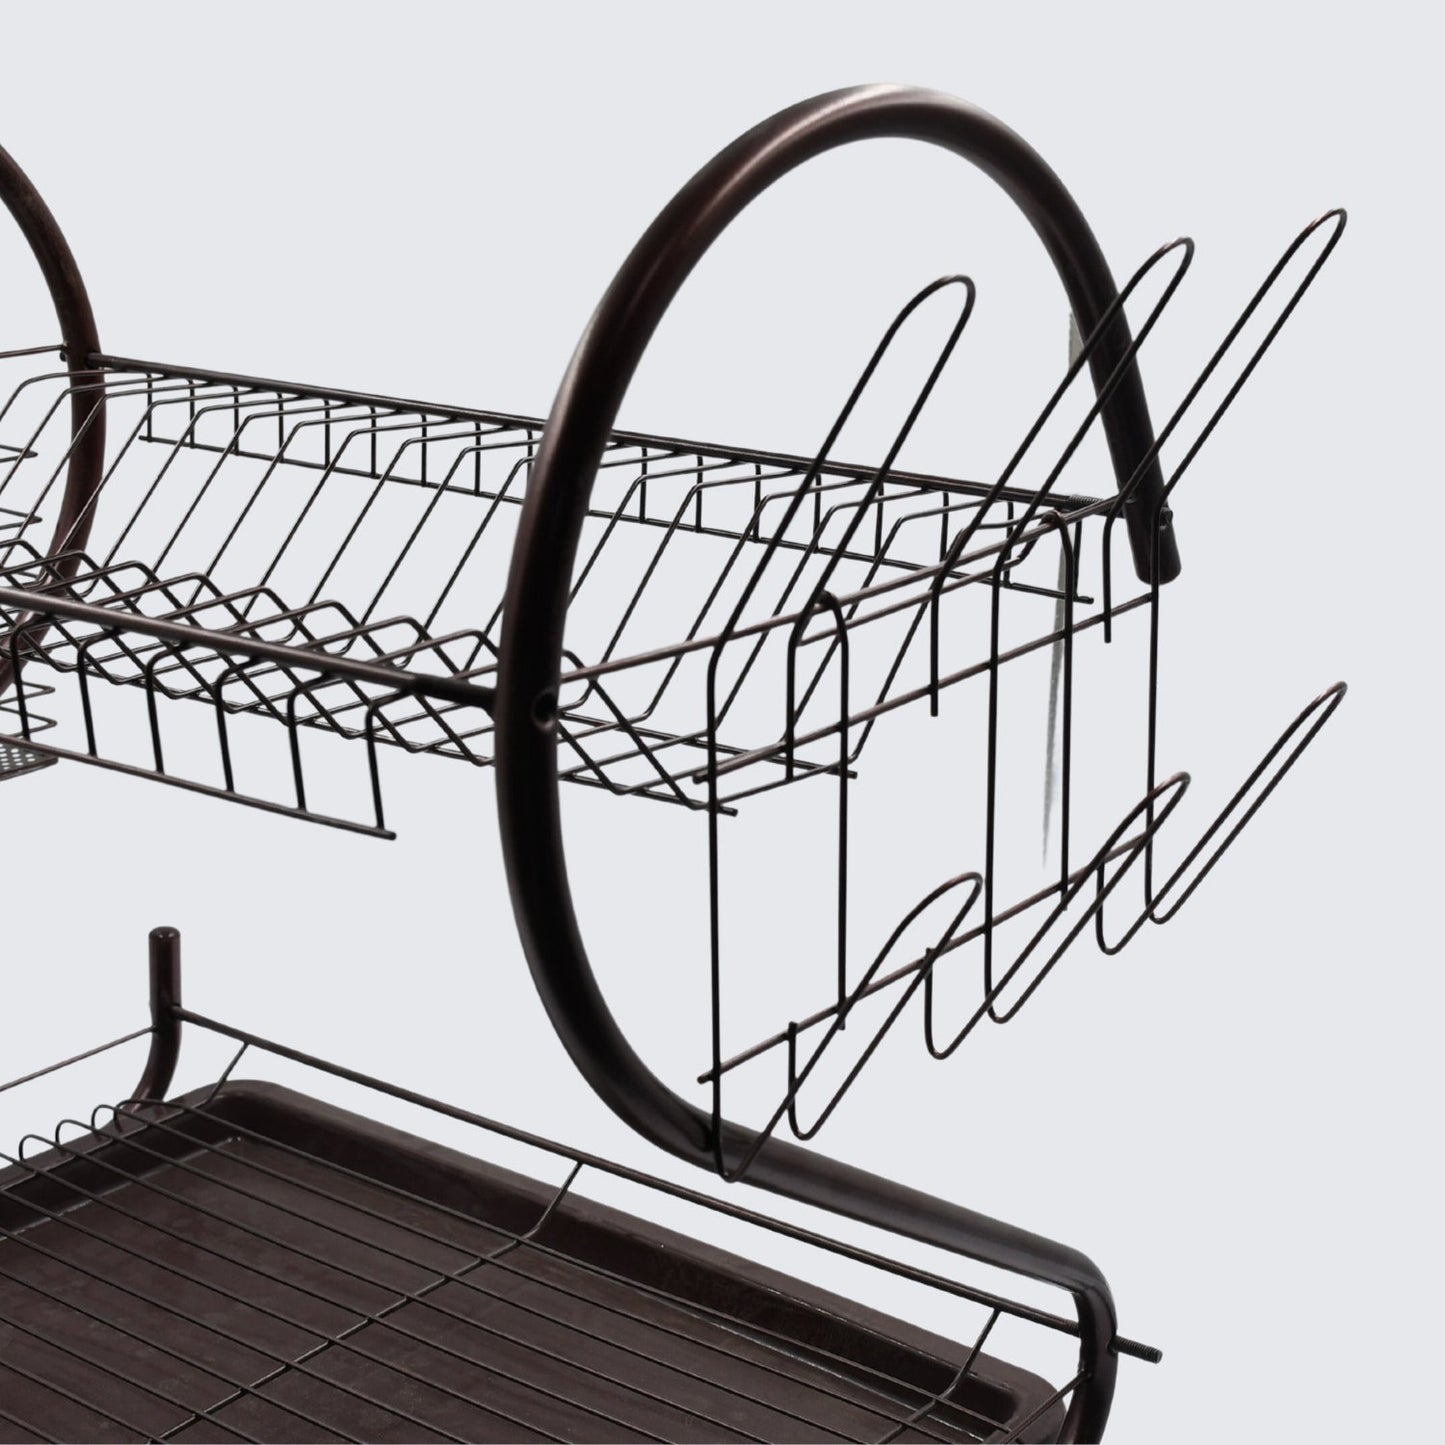 5950 2 Tier Dish Drying Rack Stainless Steel Large Dish Plate Rack Metal Strainer Dryer Racks Two Tier Dishes Drainer and Drain Tray with Utensil